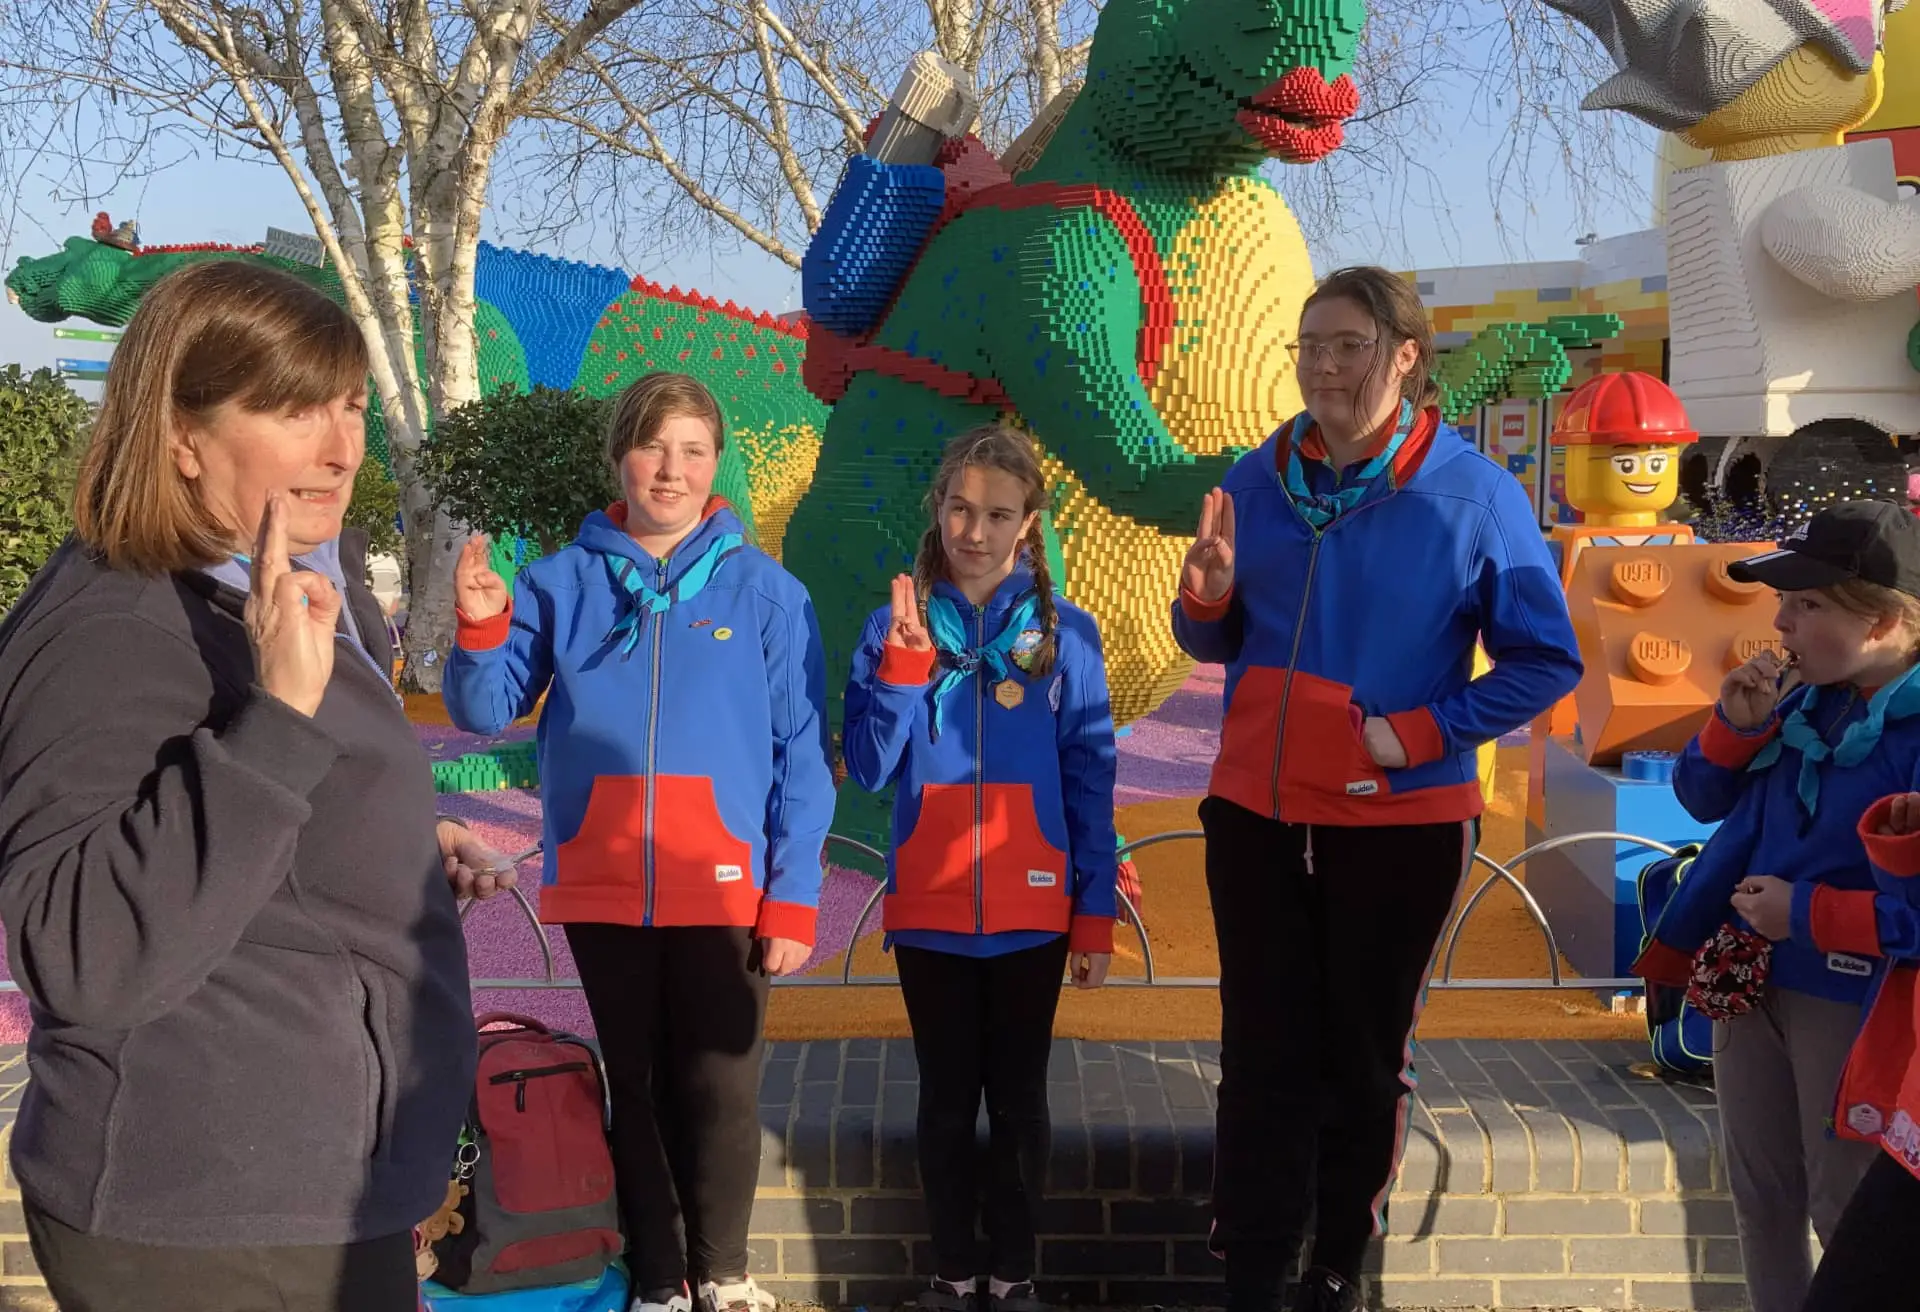 Girlguides at Lego Land March 2022